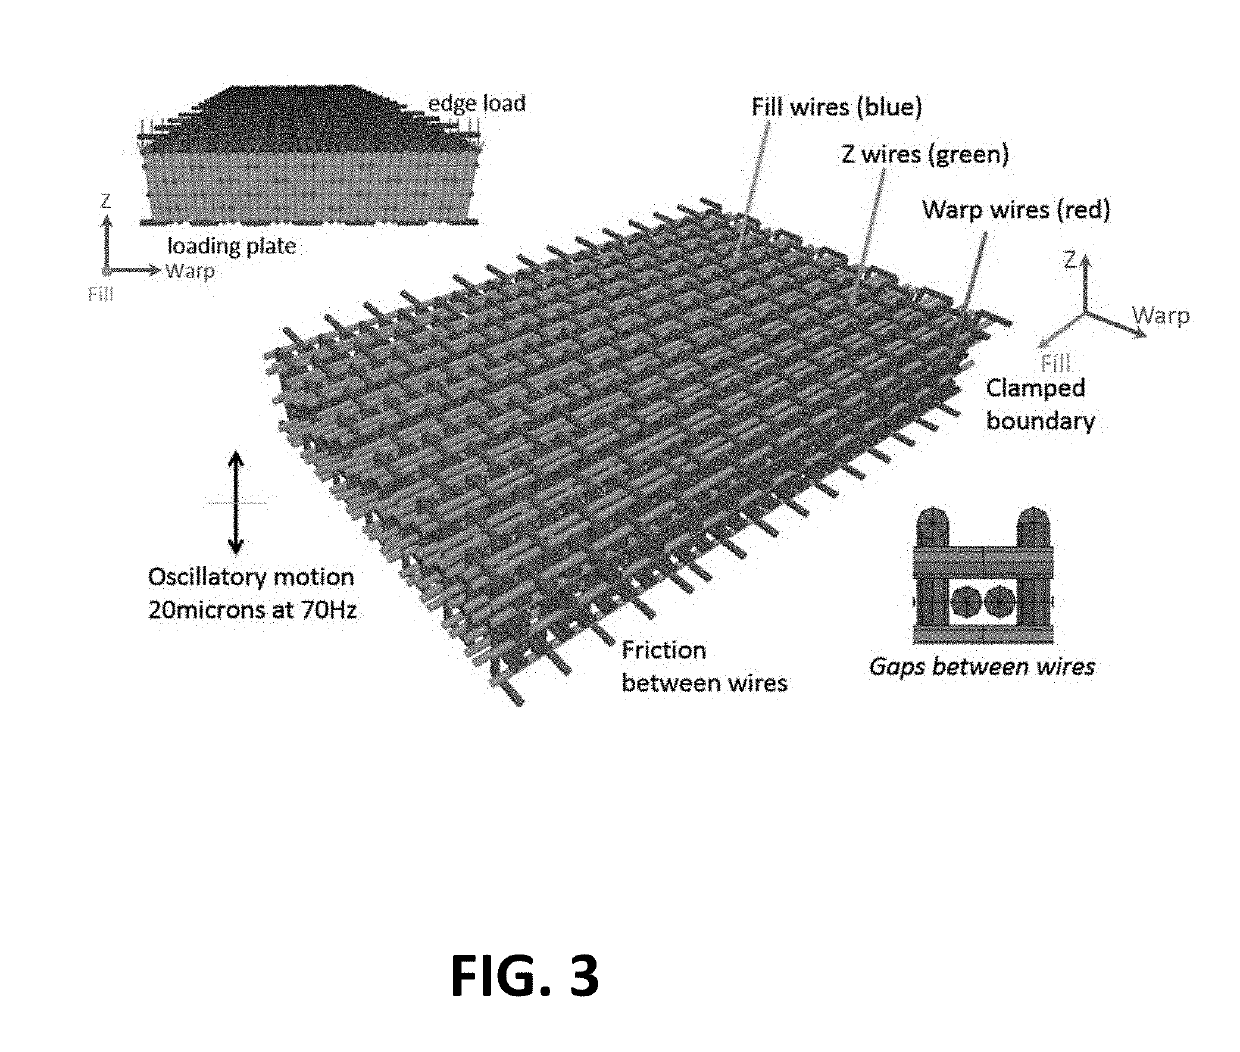 Three dimensional lattice weaves with tailored damping properties